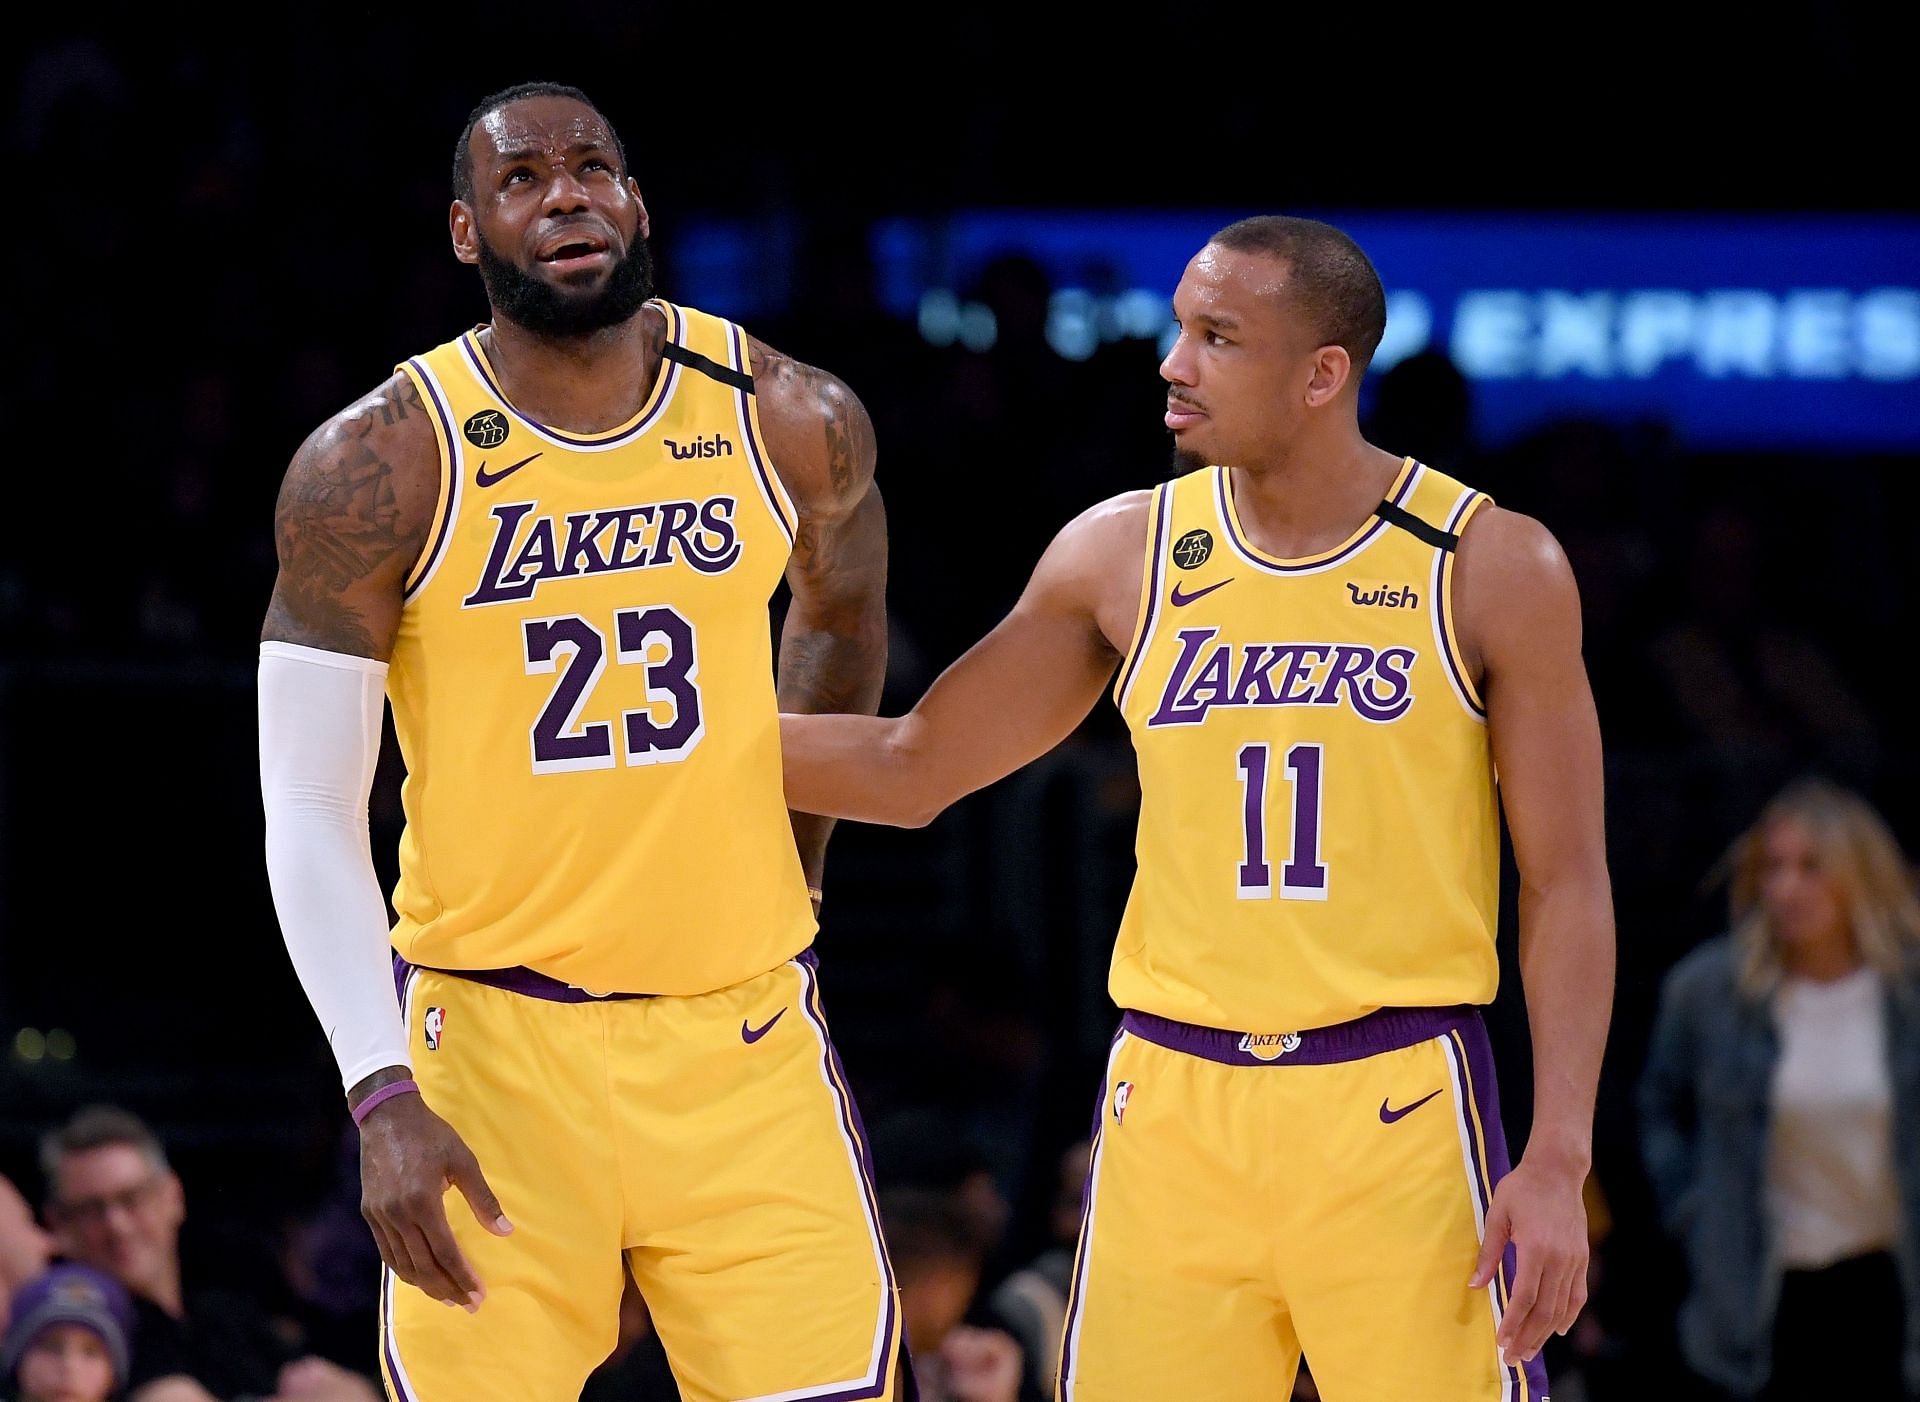 LeBron James and Avery Bradley of the LA Lakers